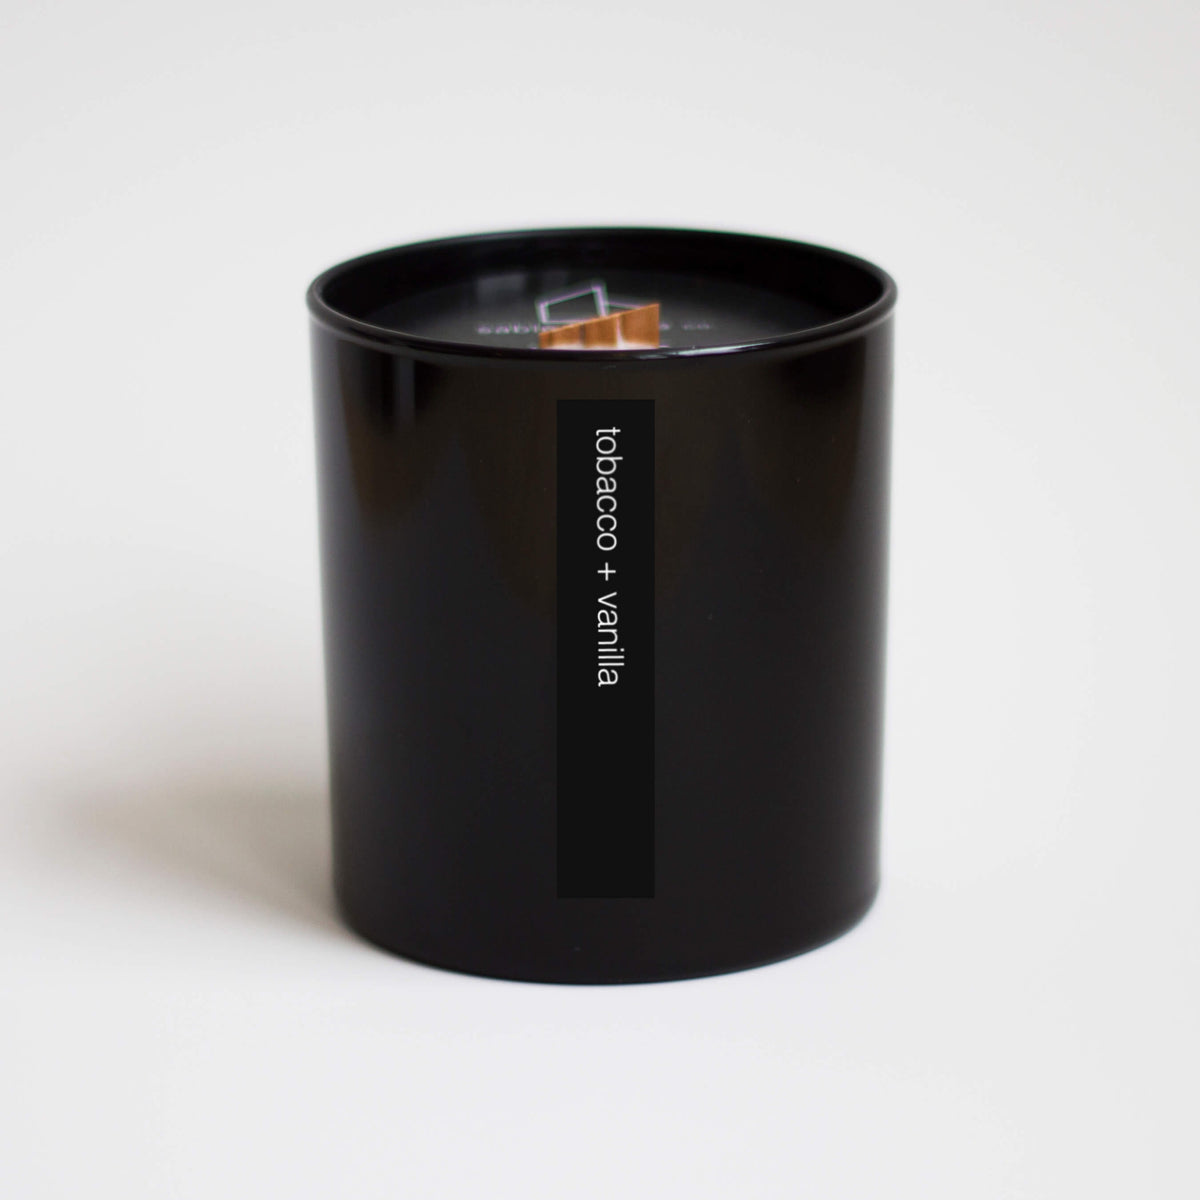 Tall black container holding beige candle with wood wick. Words on outside read &quot;tobacco + vanilla&quot;.